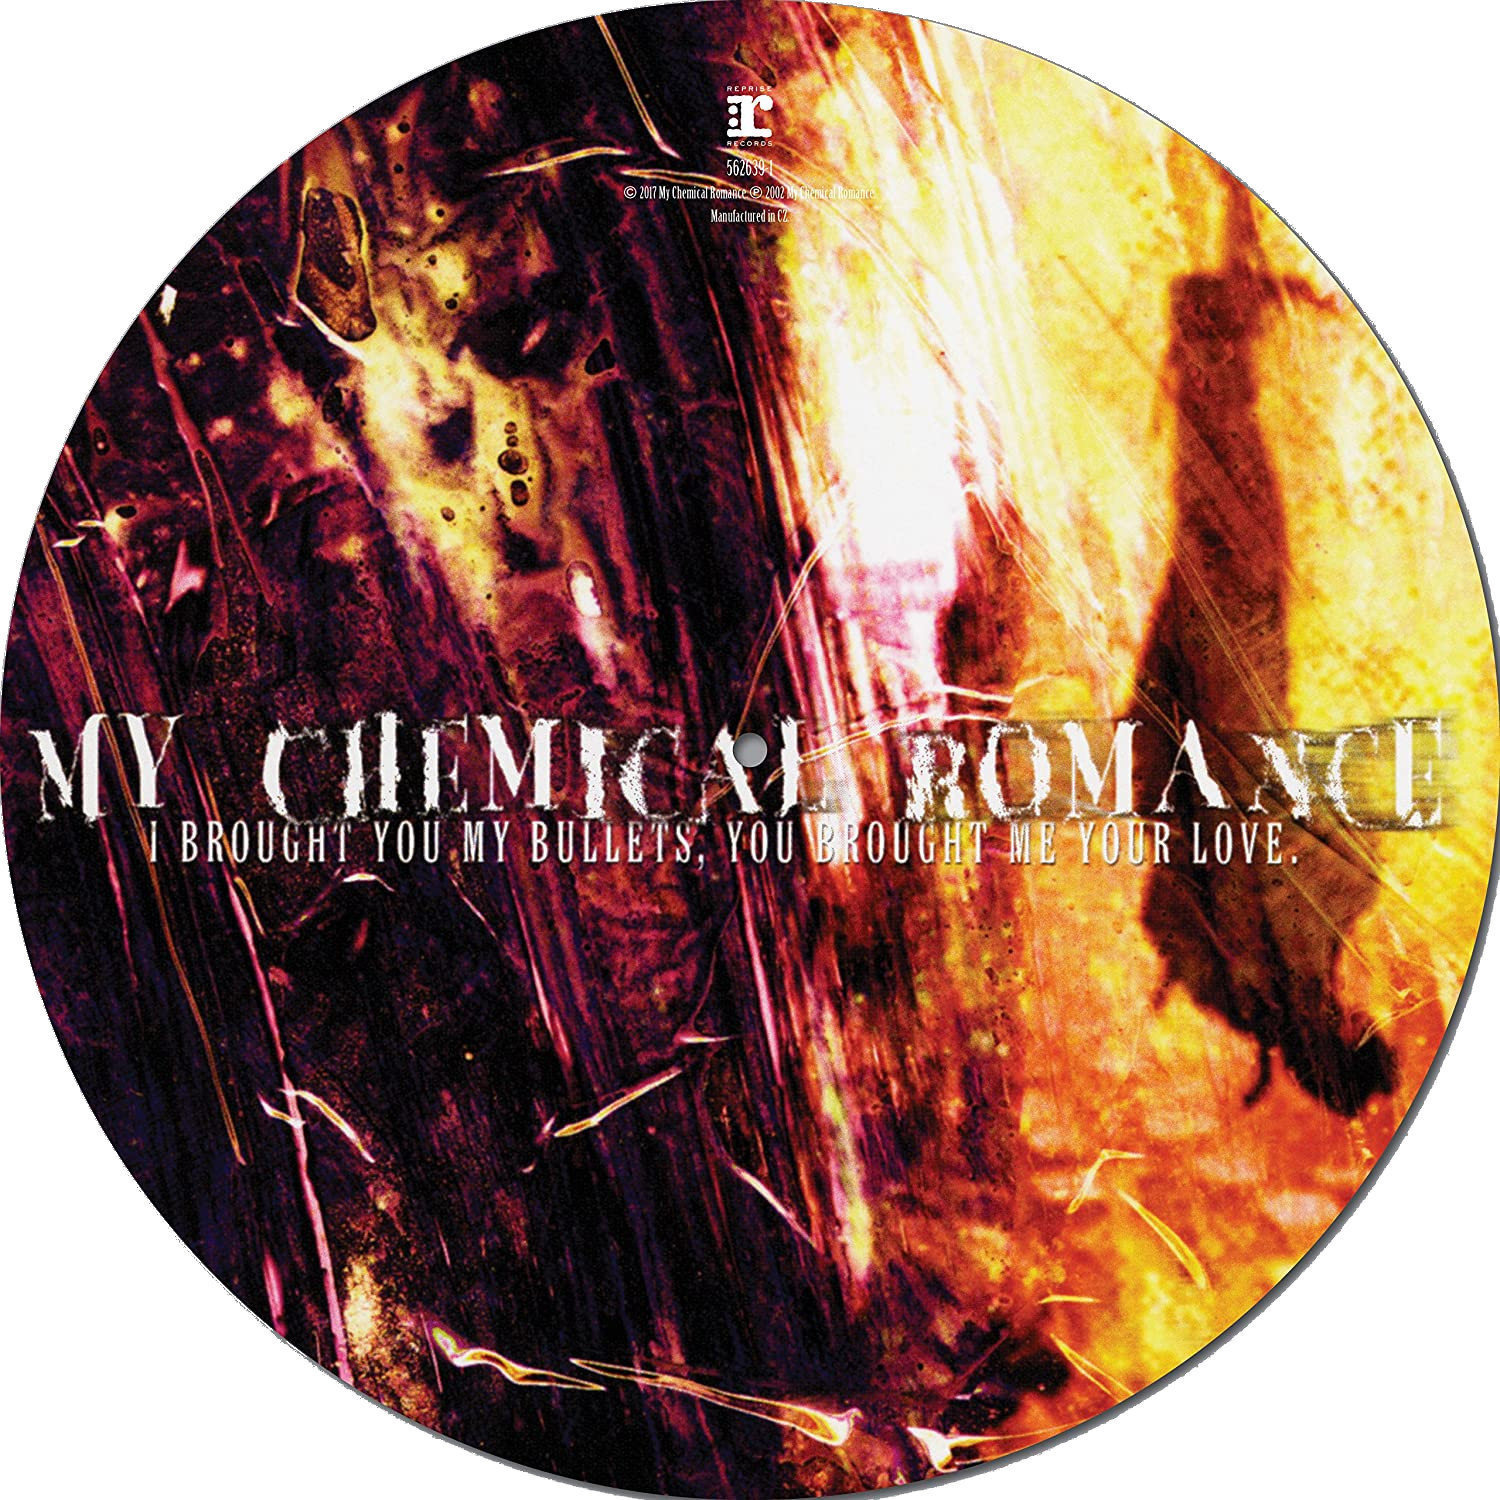 LP platňa My Chemical Romance - I Brought You My Bullets, You Brought Me Your Love (Picture Disc) (LP)